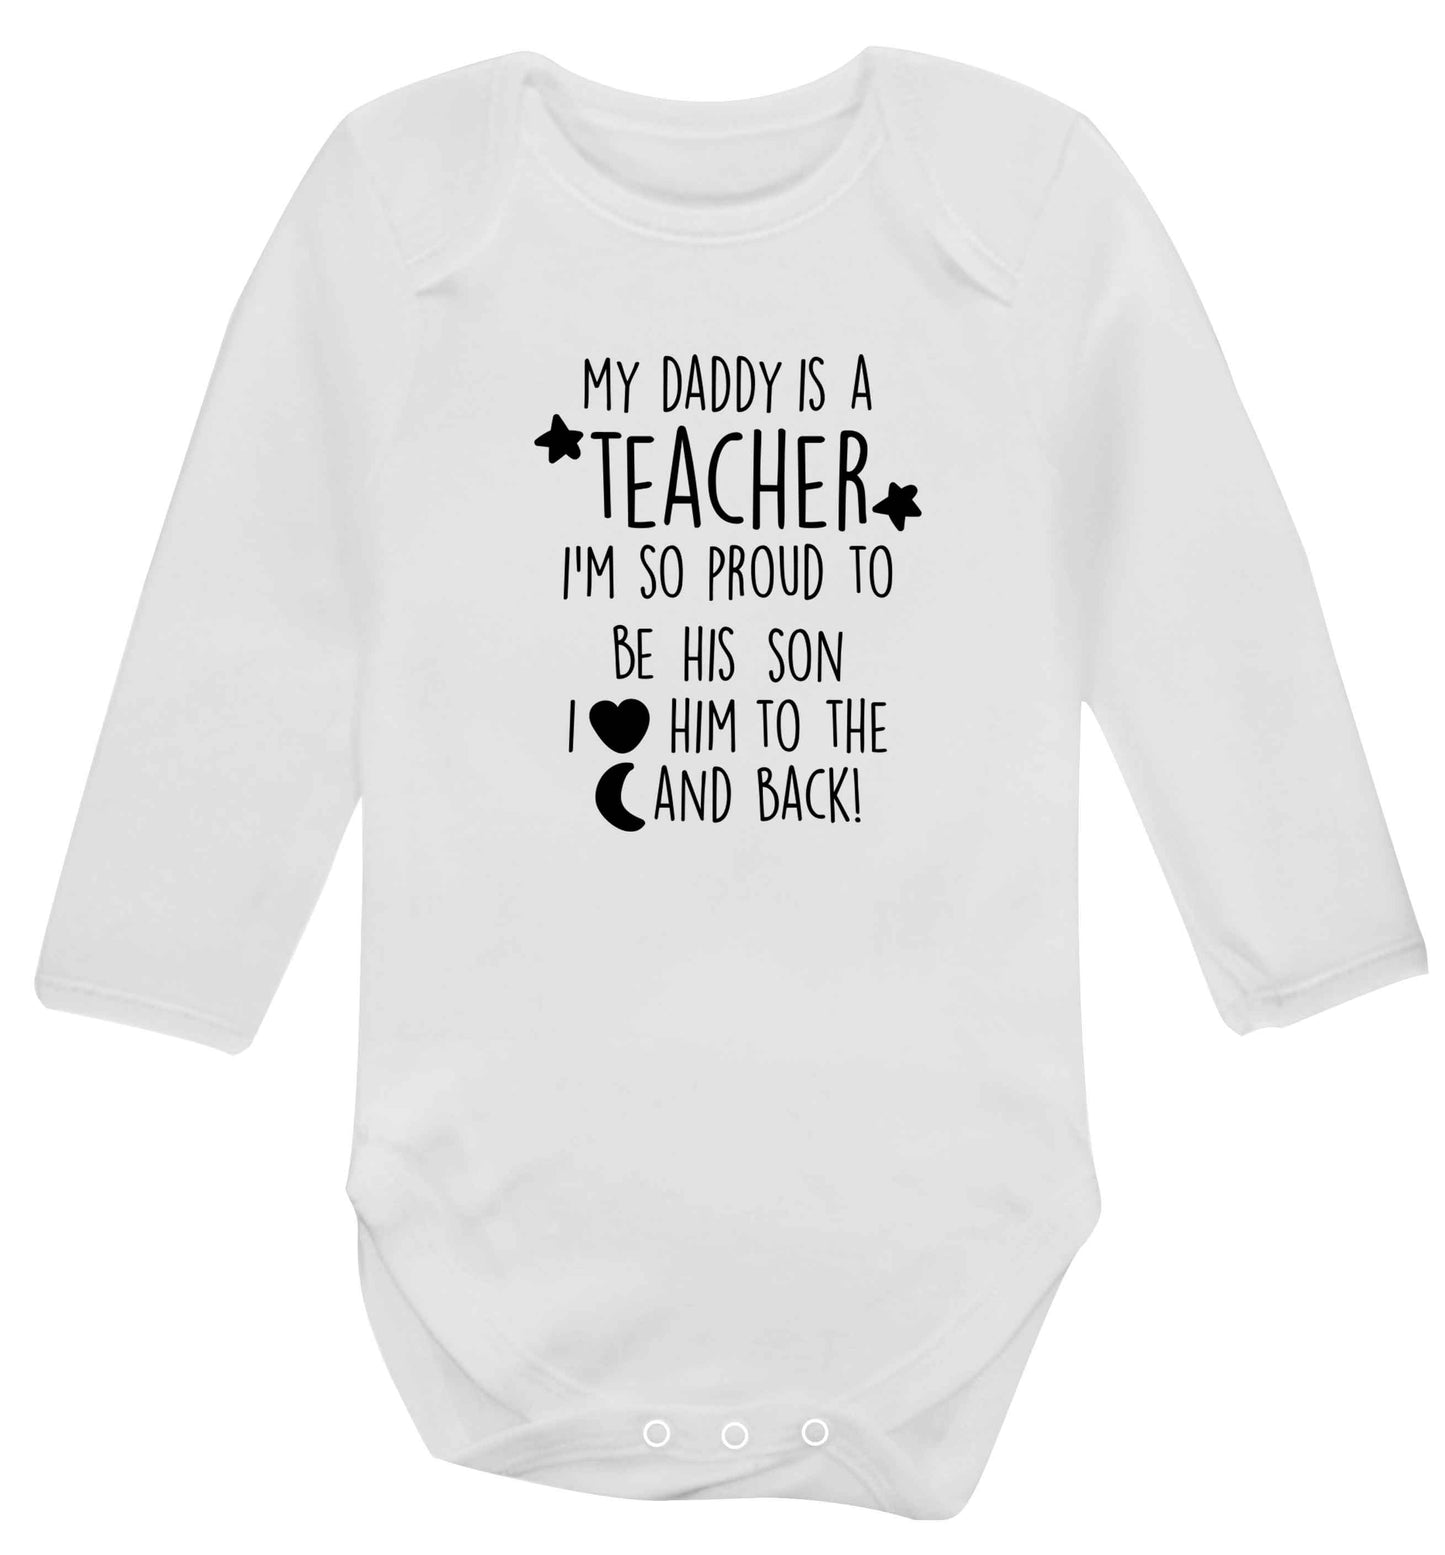 My daddy is a teacher I'm so proud to be his son I love her to the moon and back baby vest long sleeved white 6-12 months